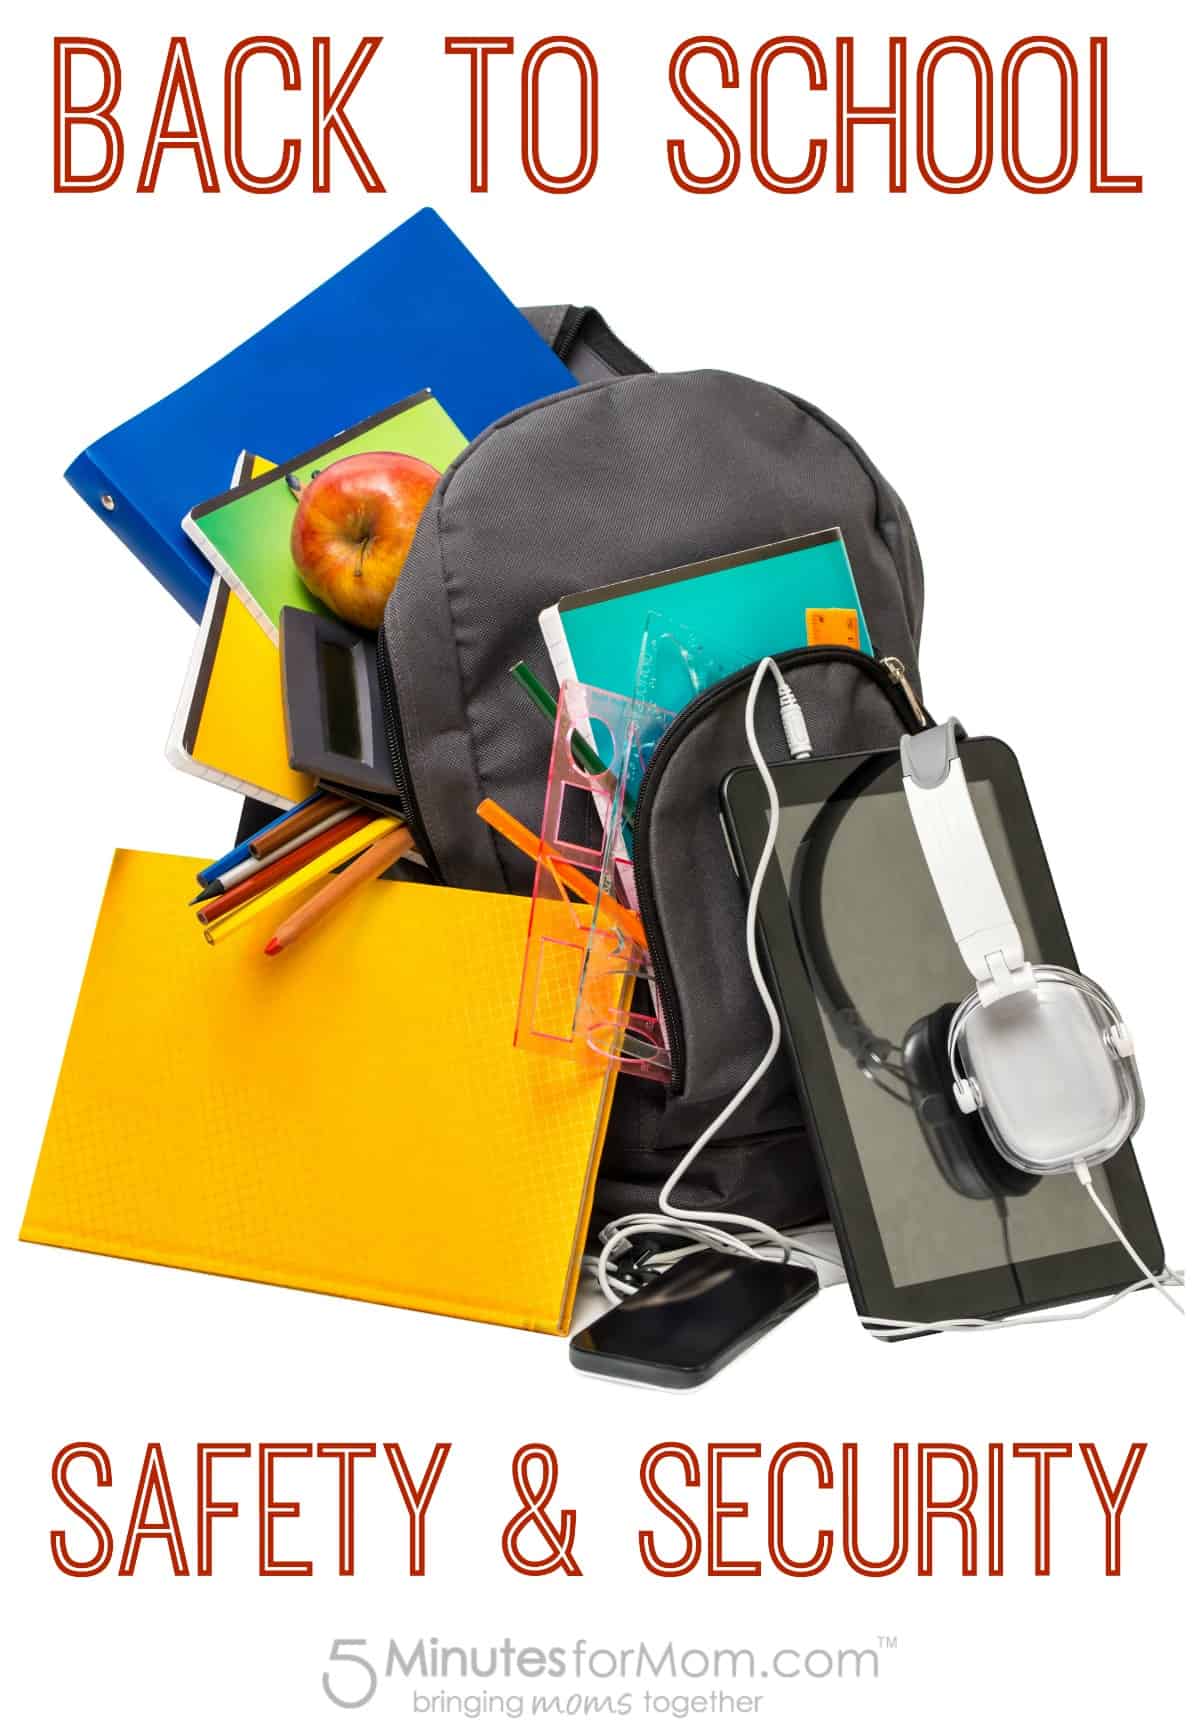 Back to School Safety and Security Tips